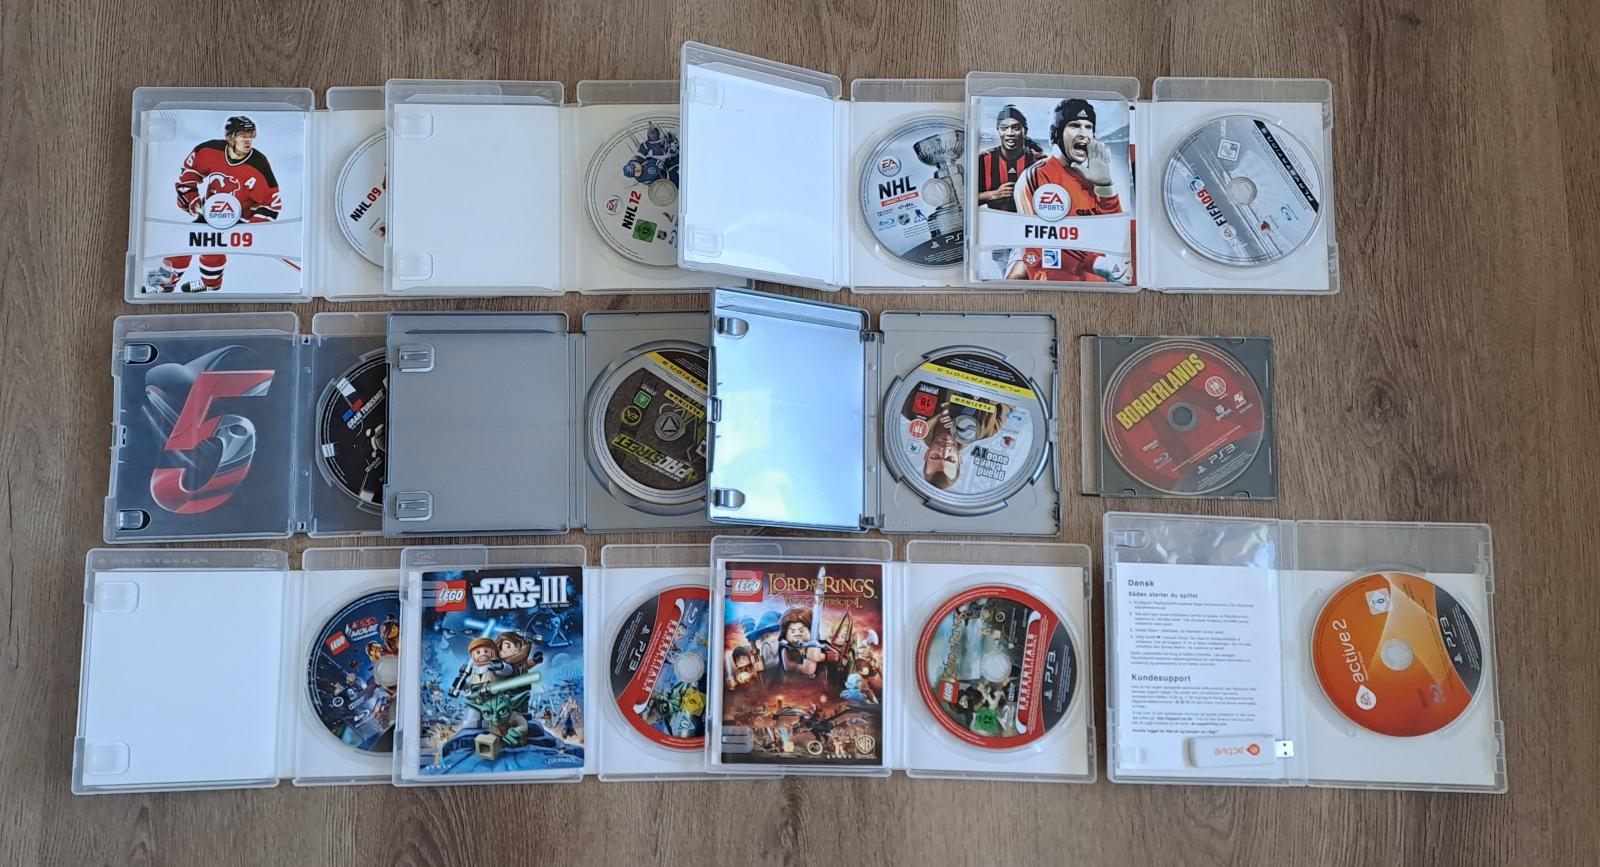 12x hra na PS3 - FIFA, NHL, GTA, Gran Turismo 5, LEGO, Need for Speed - Hry